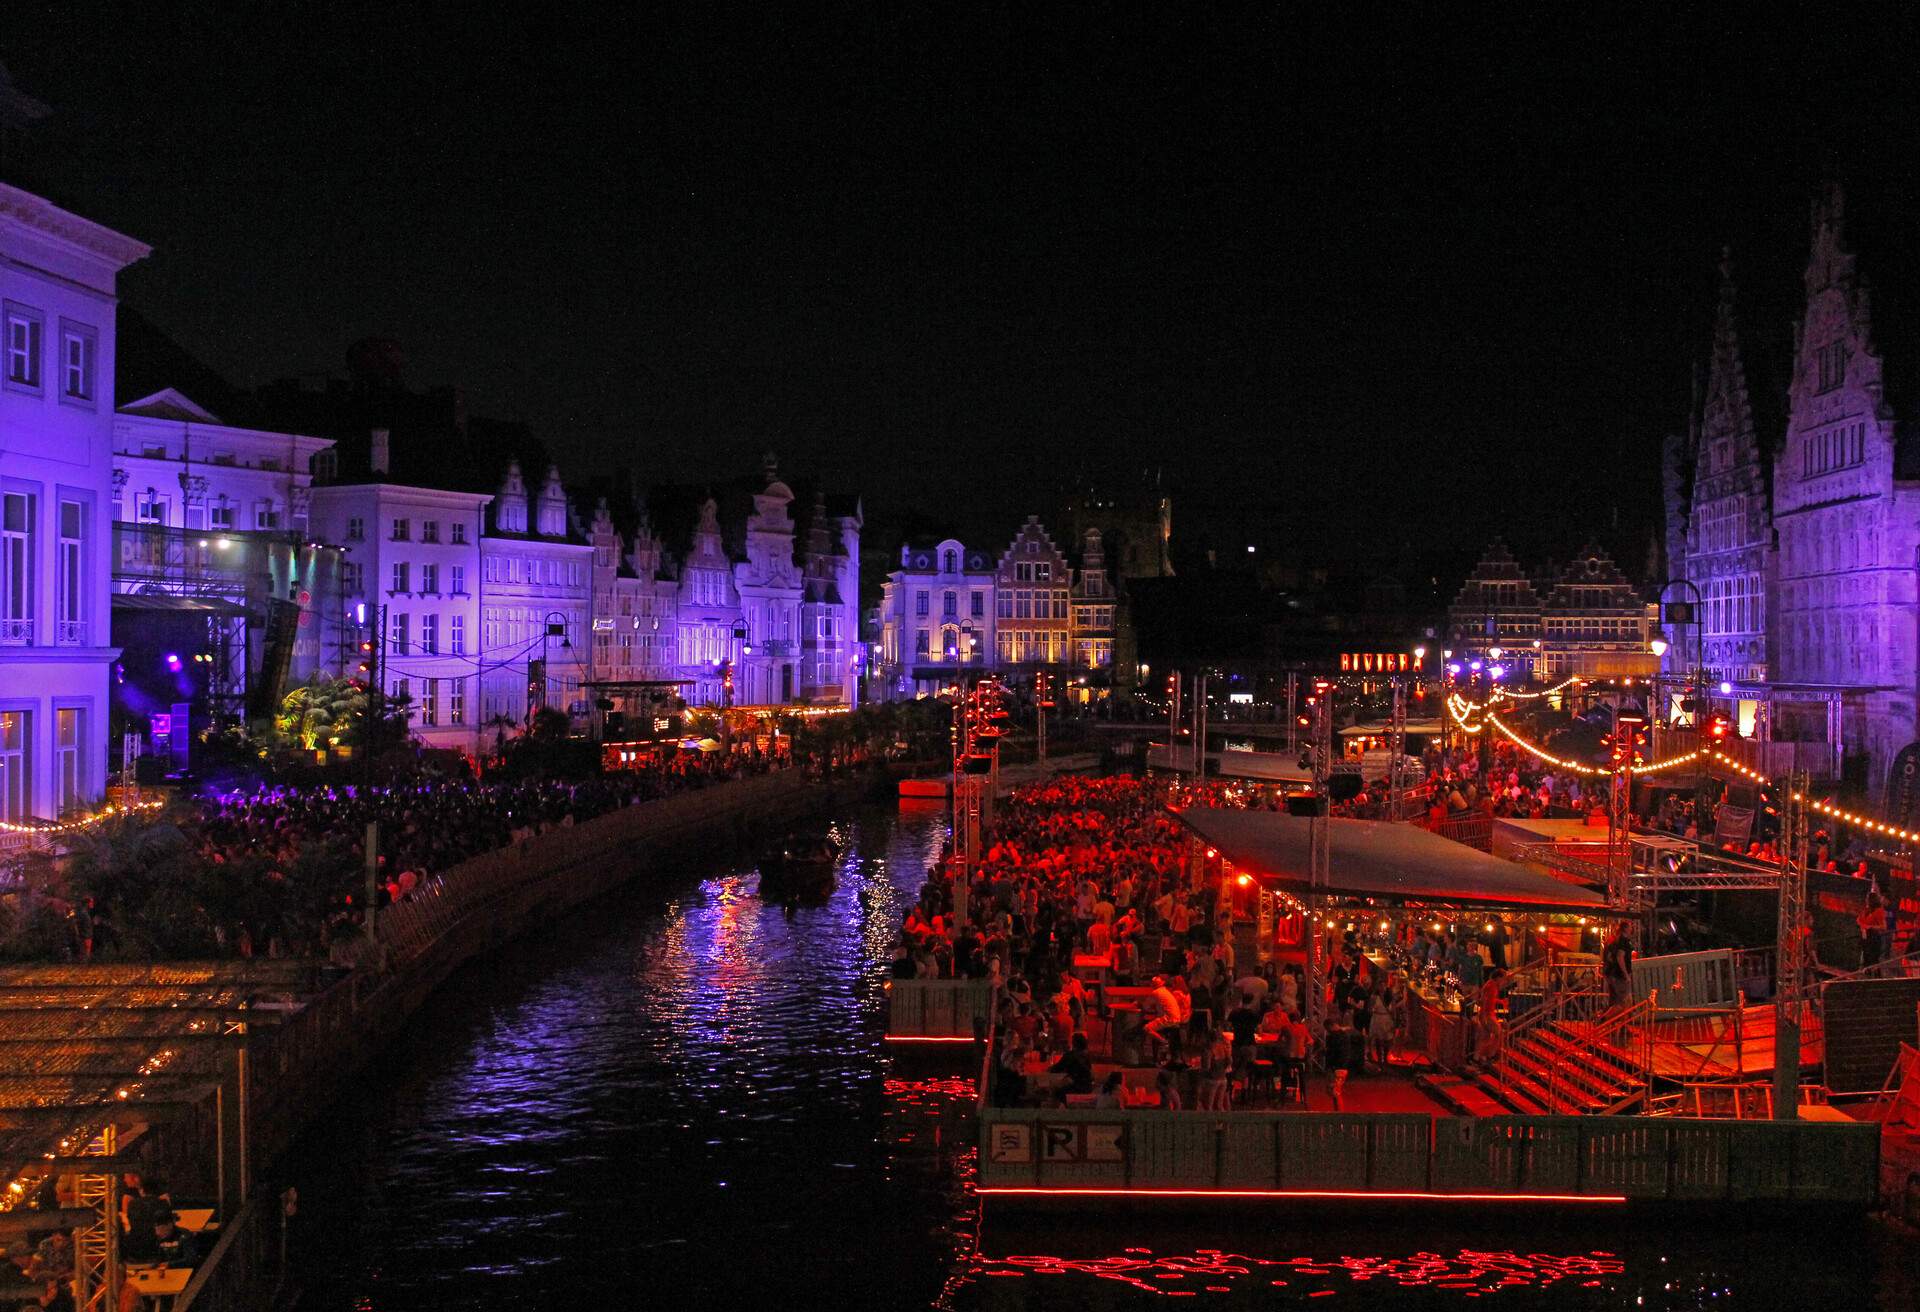 Gentse Feesten is one of the biggest festival in Europe and many people gather and enjoy in all entire city of Gent.